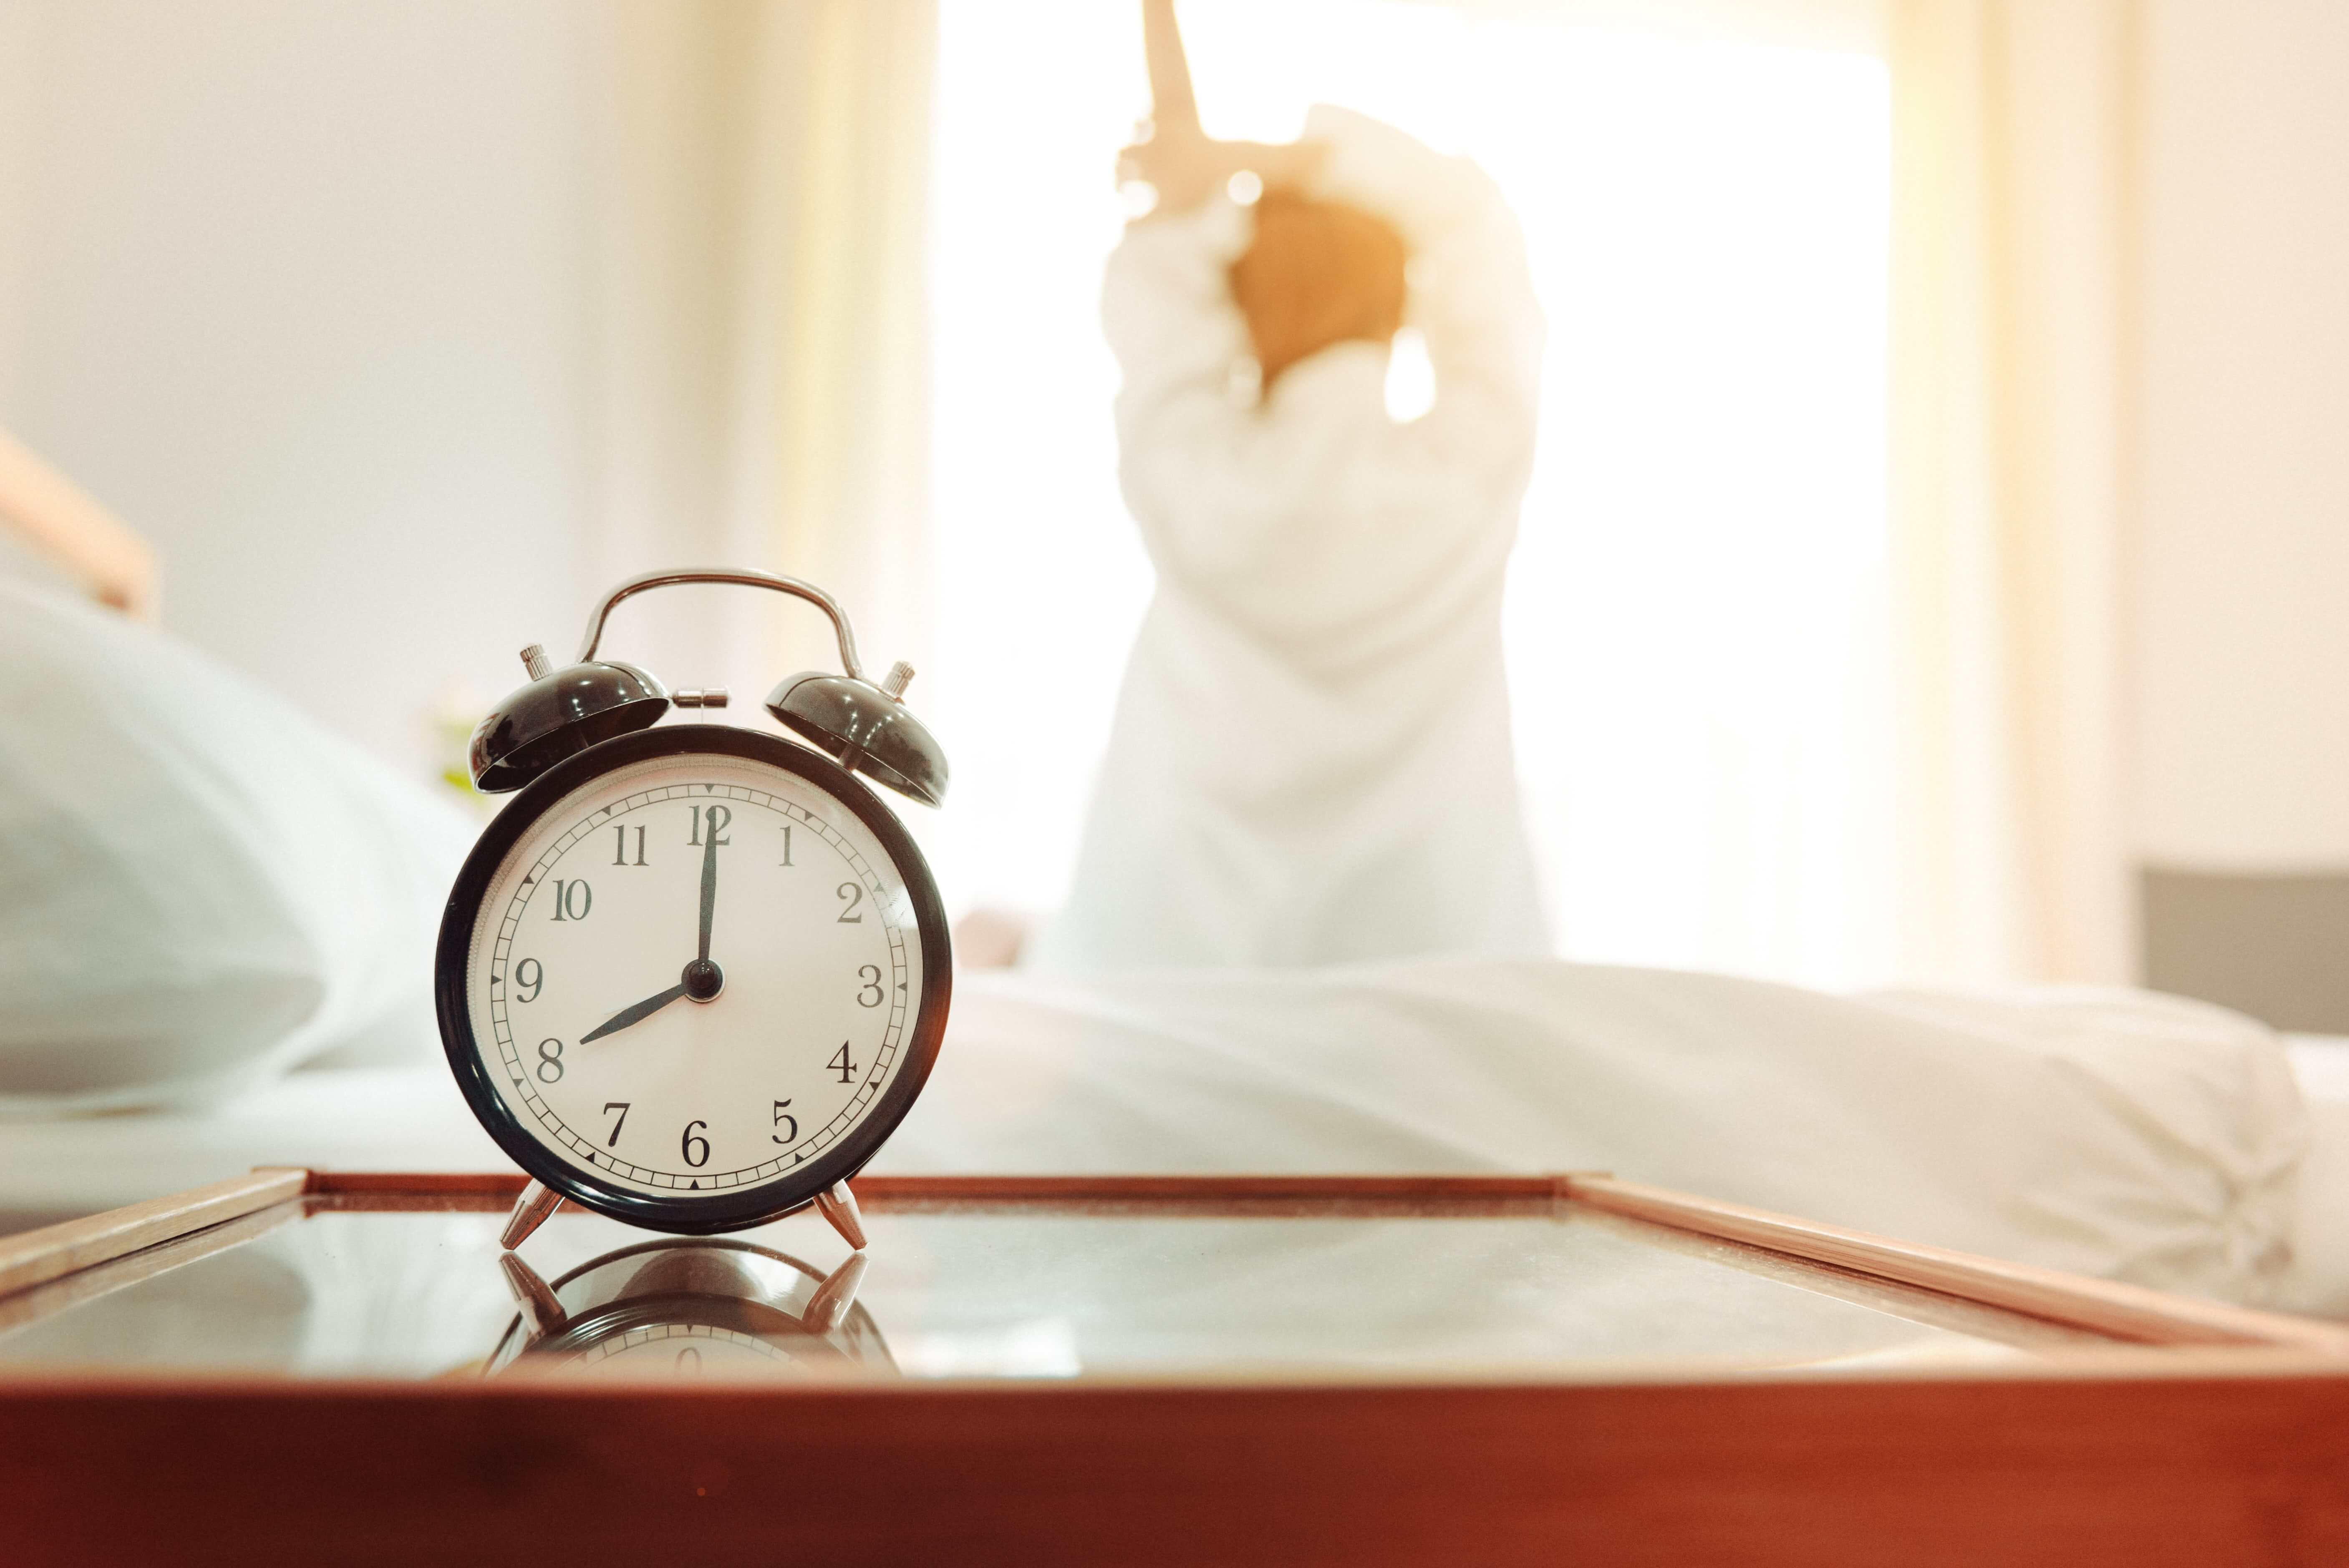 Alarm clock showing 8am with woman stretching after sleep